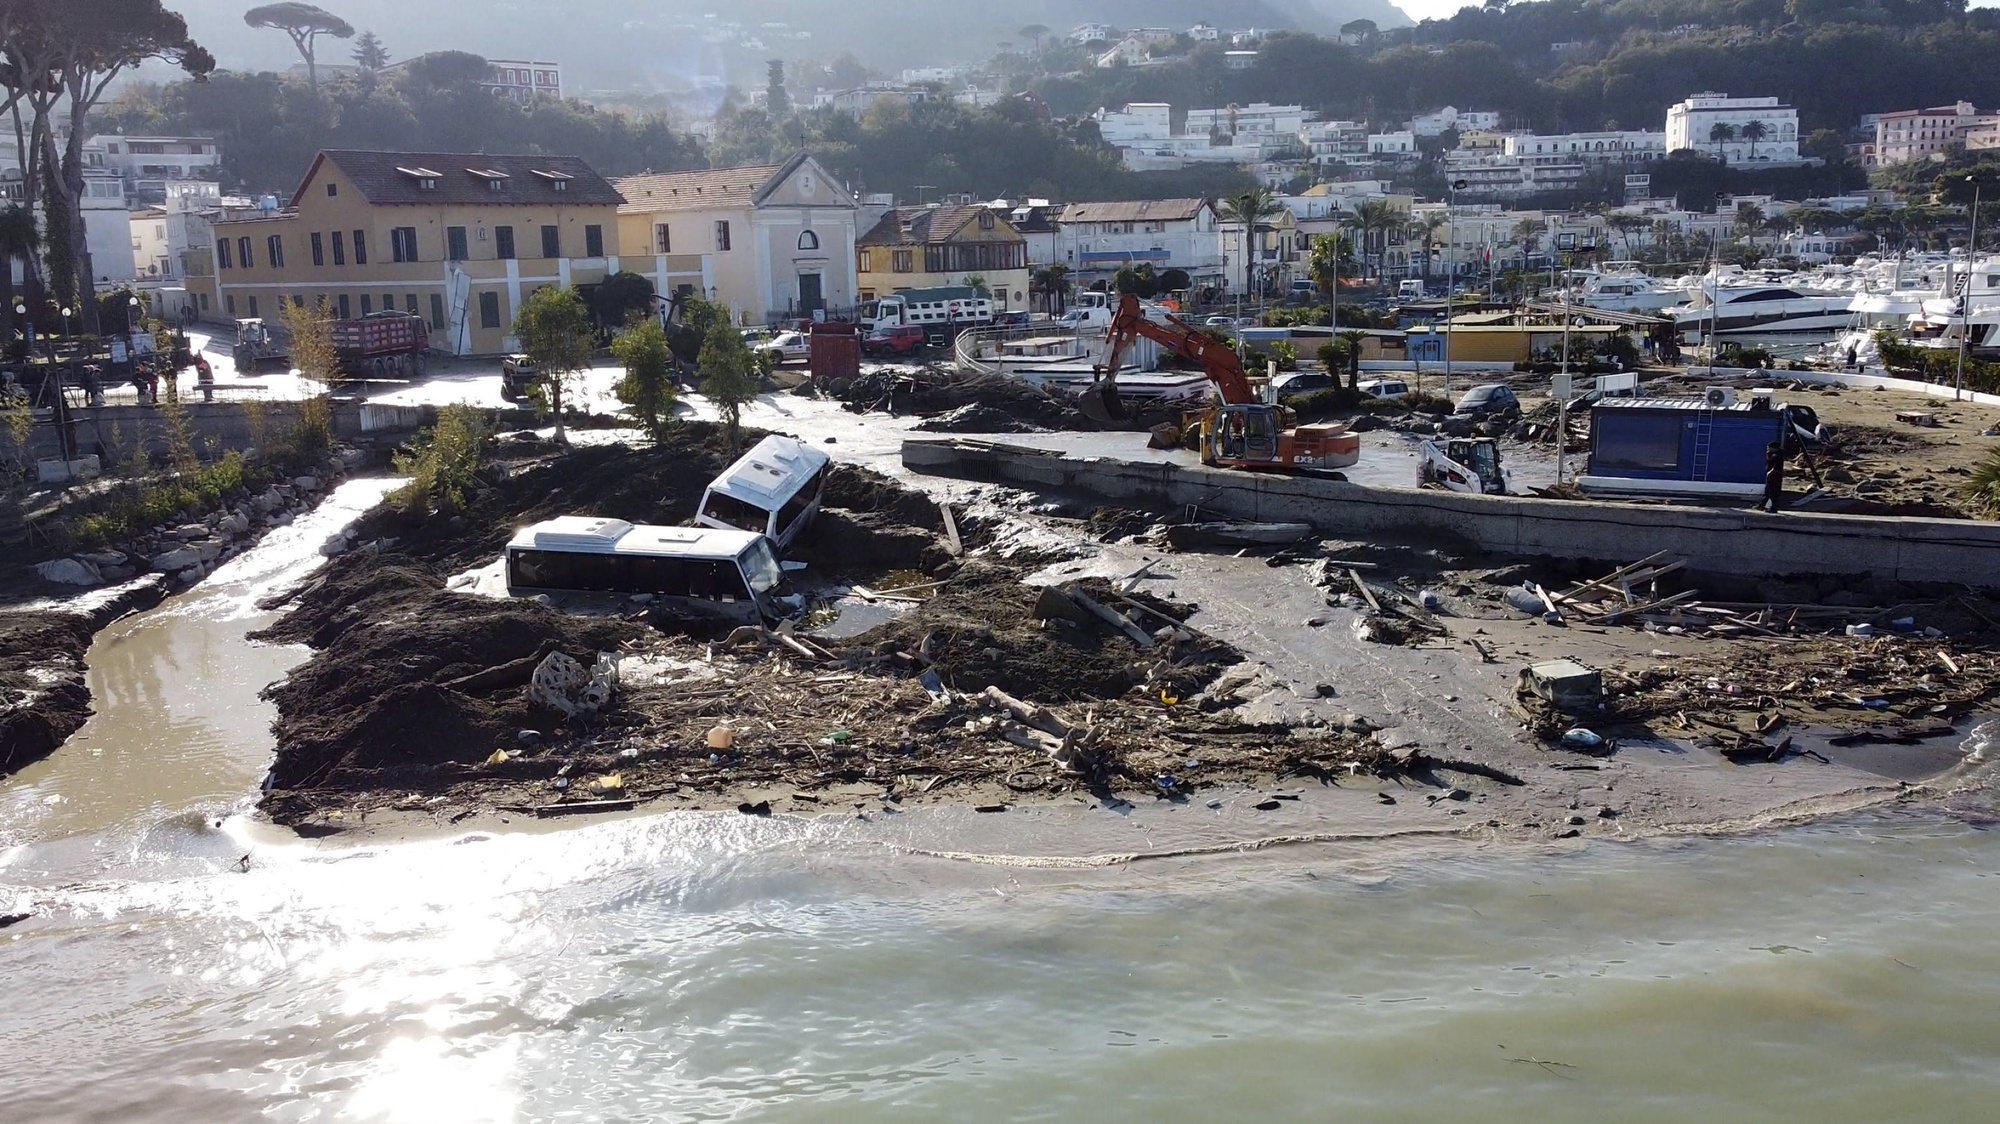 epa10341559 The port of Casamicciola after a landslide, Ischia Island, Italy, 01 December 2022. Italy declared a state of emergency following the landslide on Ischia Island which has left at least eight people dead, four missing and many more homeless. A massive avalanche of mud and debris hit the town of Casamicciola Terme following intense rain on 26 November 2022.  EPA/CIRO FUSCO ITALY OUT